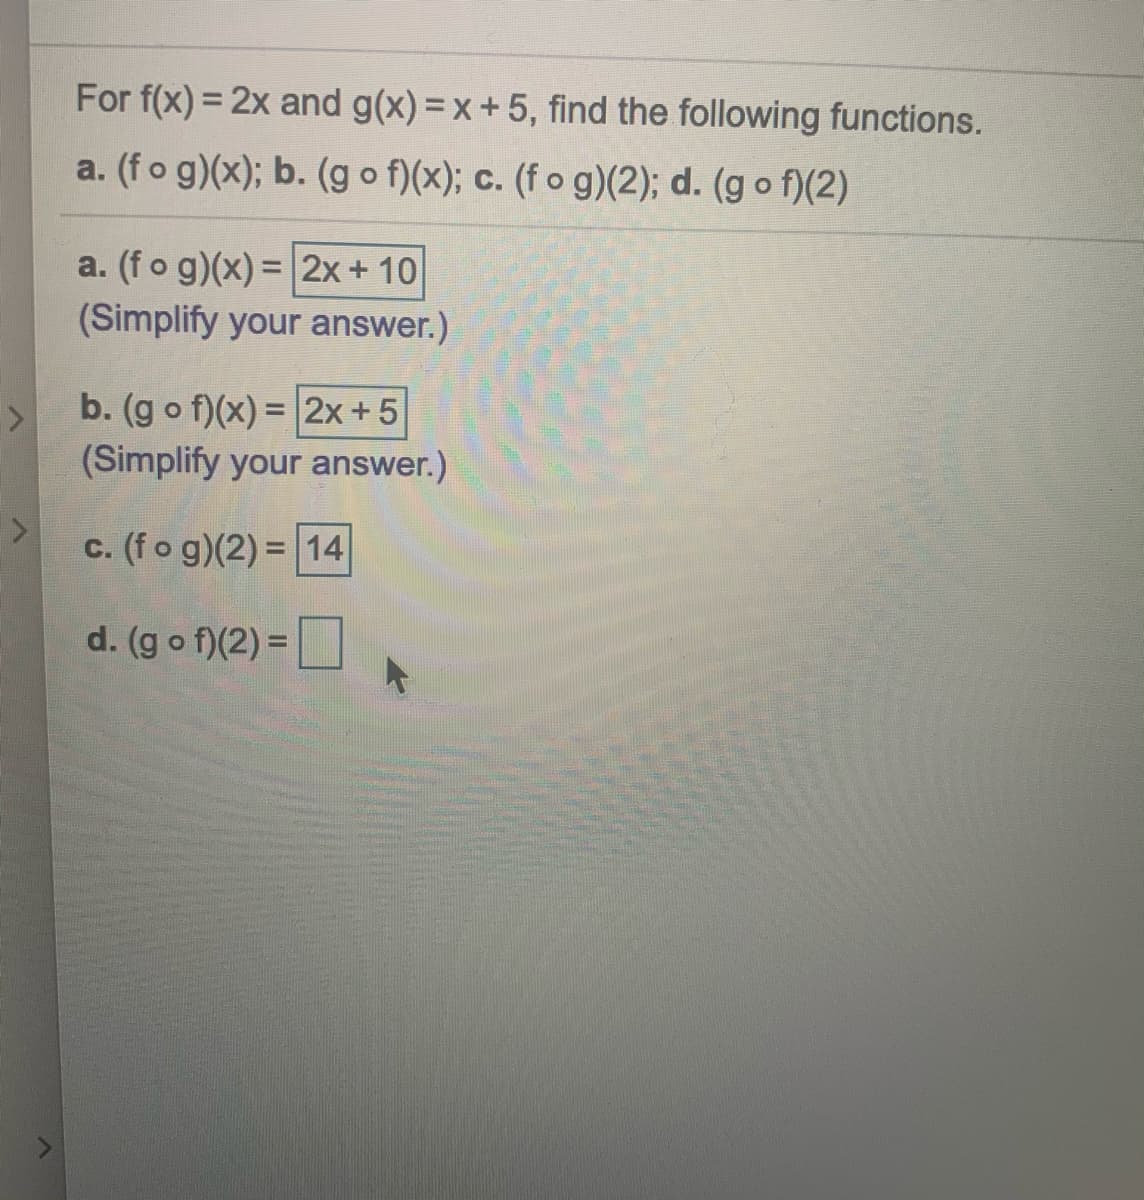 For f(x) = 2x and g(x) =x+5, find the following functions.
a. (fo g)(x); b. (g o f)(x); c. (f o g)(2); d. (g o f)(2)
a. (fo g)(x) = 2x+ 10
(Simplify your answer.)
b. (g o f)(x) = 2x+5
(Simplify your answer.)
c. (fo g)(2) = 14
d. (g o f)(2) =
